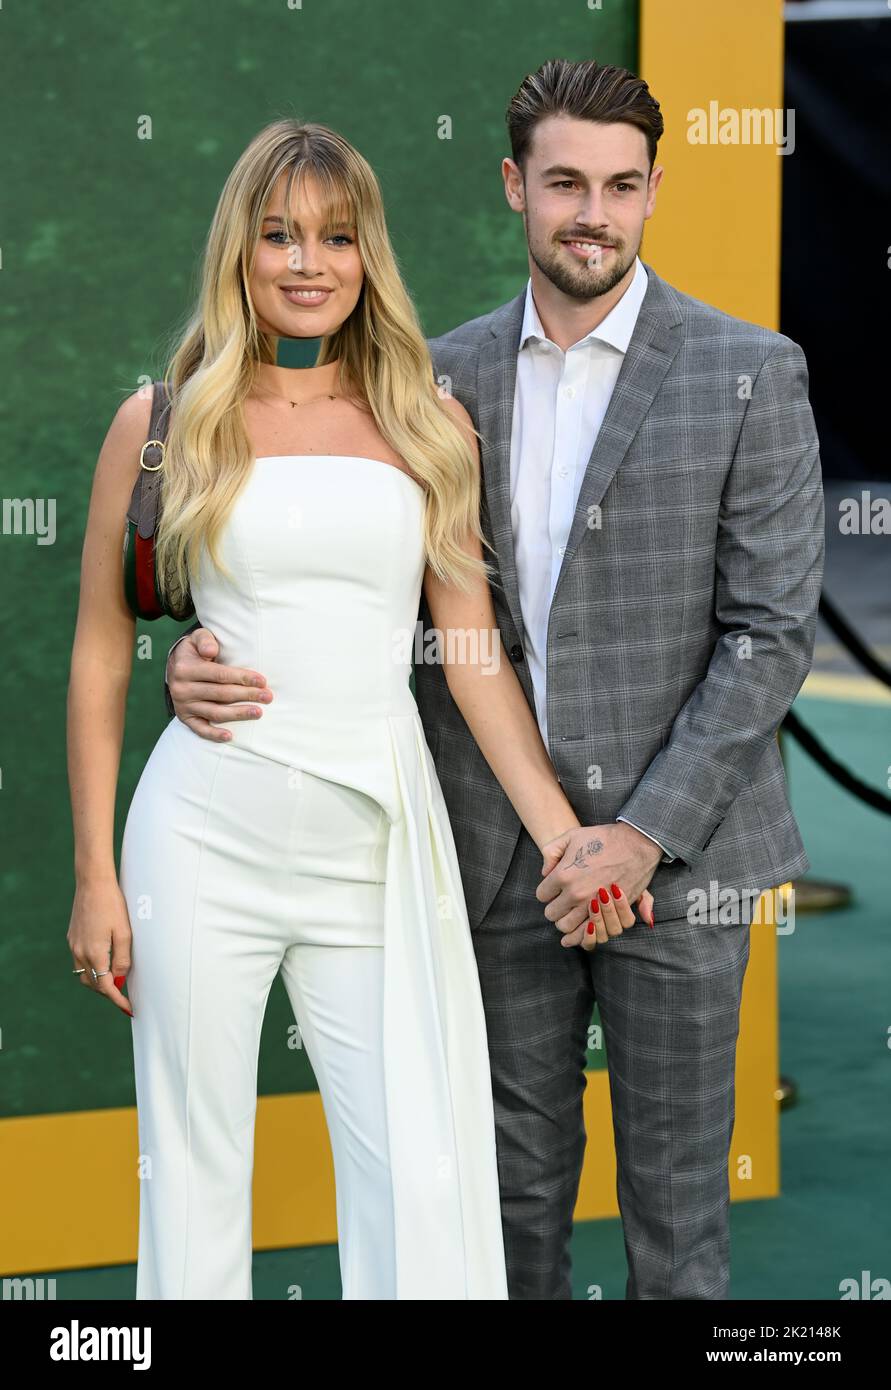 21.. September 2022. London, Großbritannien. Tasha Ghouri und Andrew Le Page bei der Premiere in Amsterdam, Odeon Luxe, Leicester Square, London. Quelle: Doug Peters/EMPICS/Alamy Live News Stockfoto